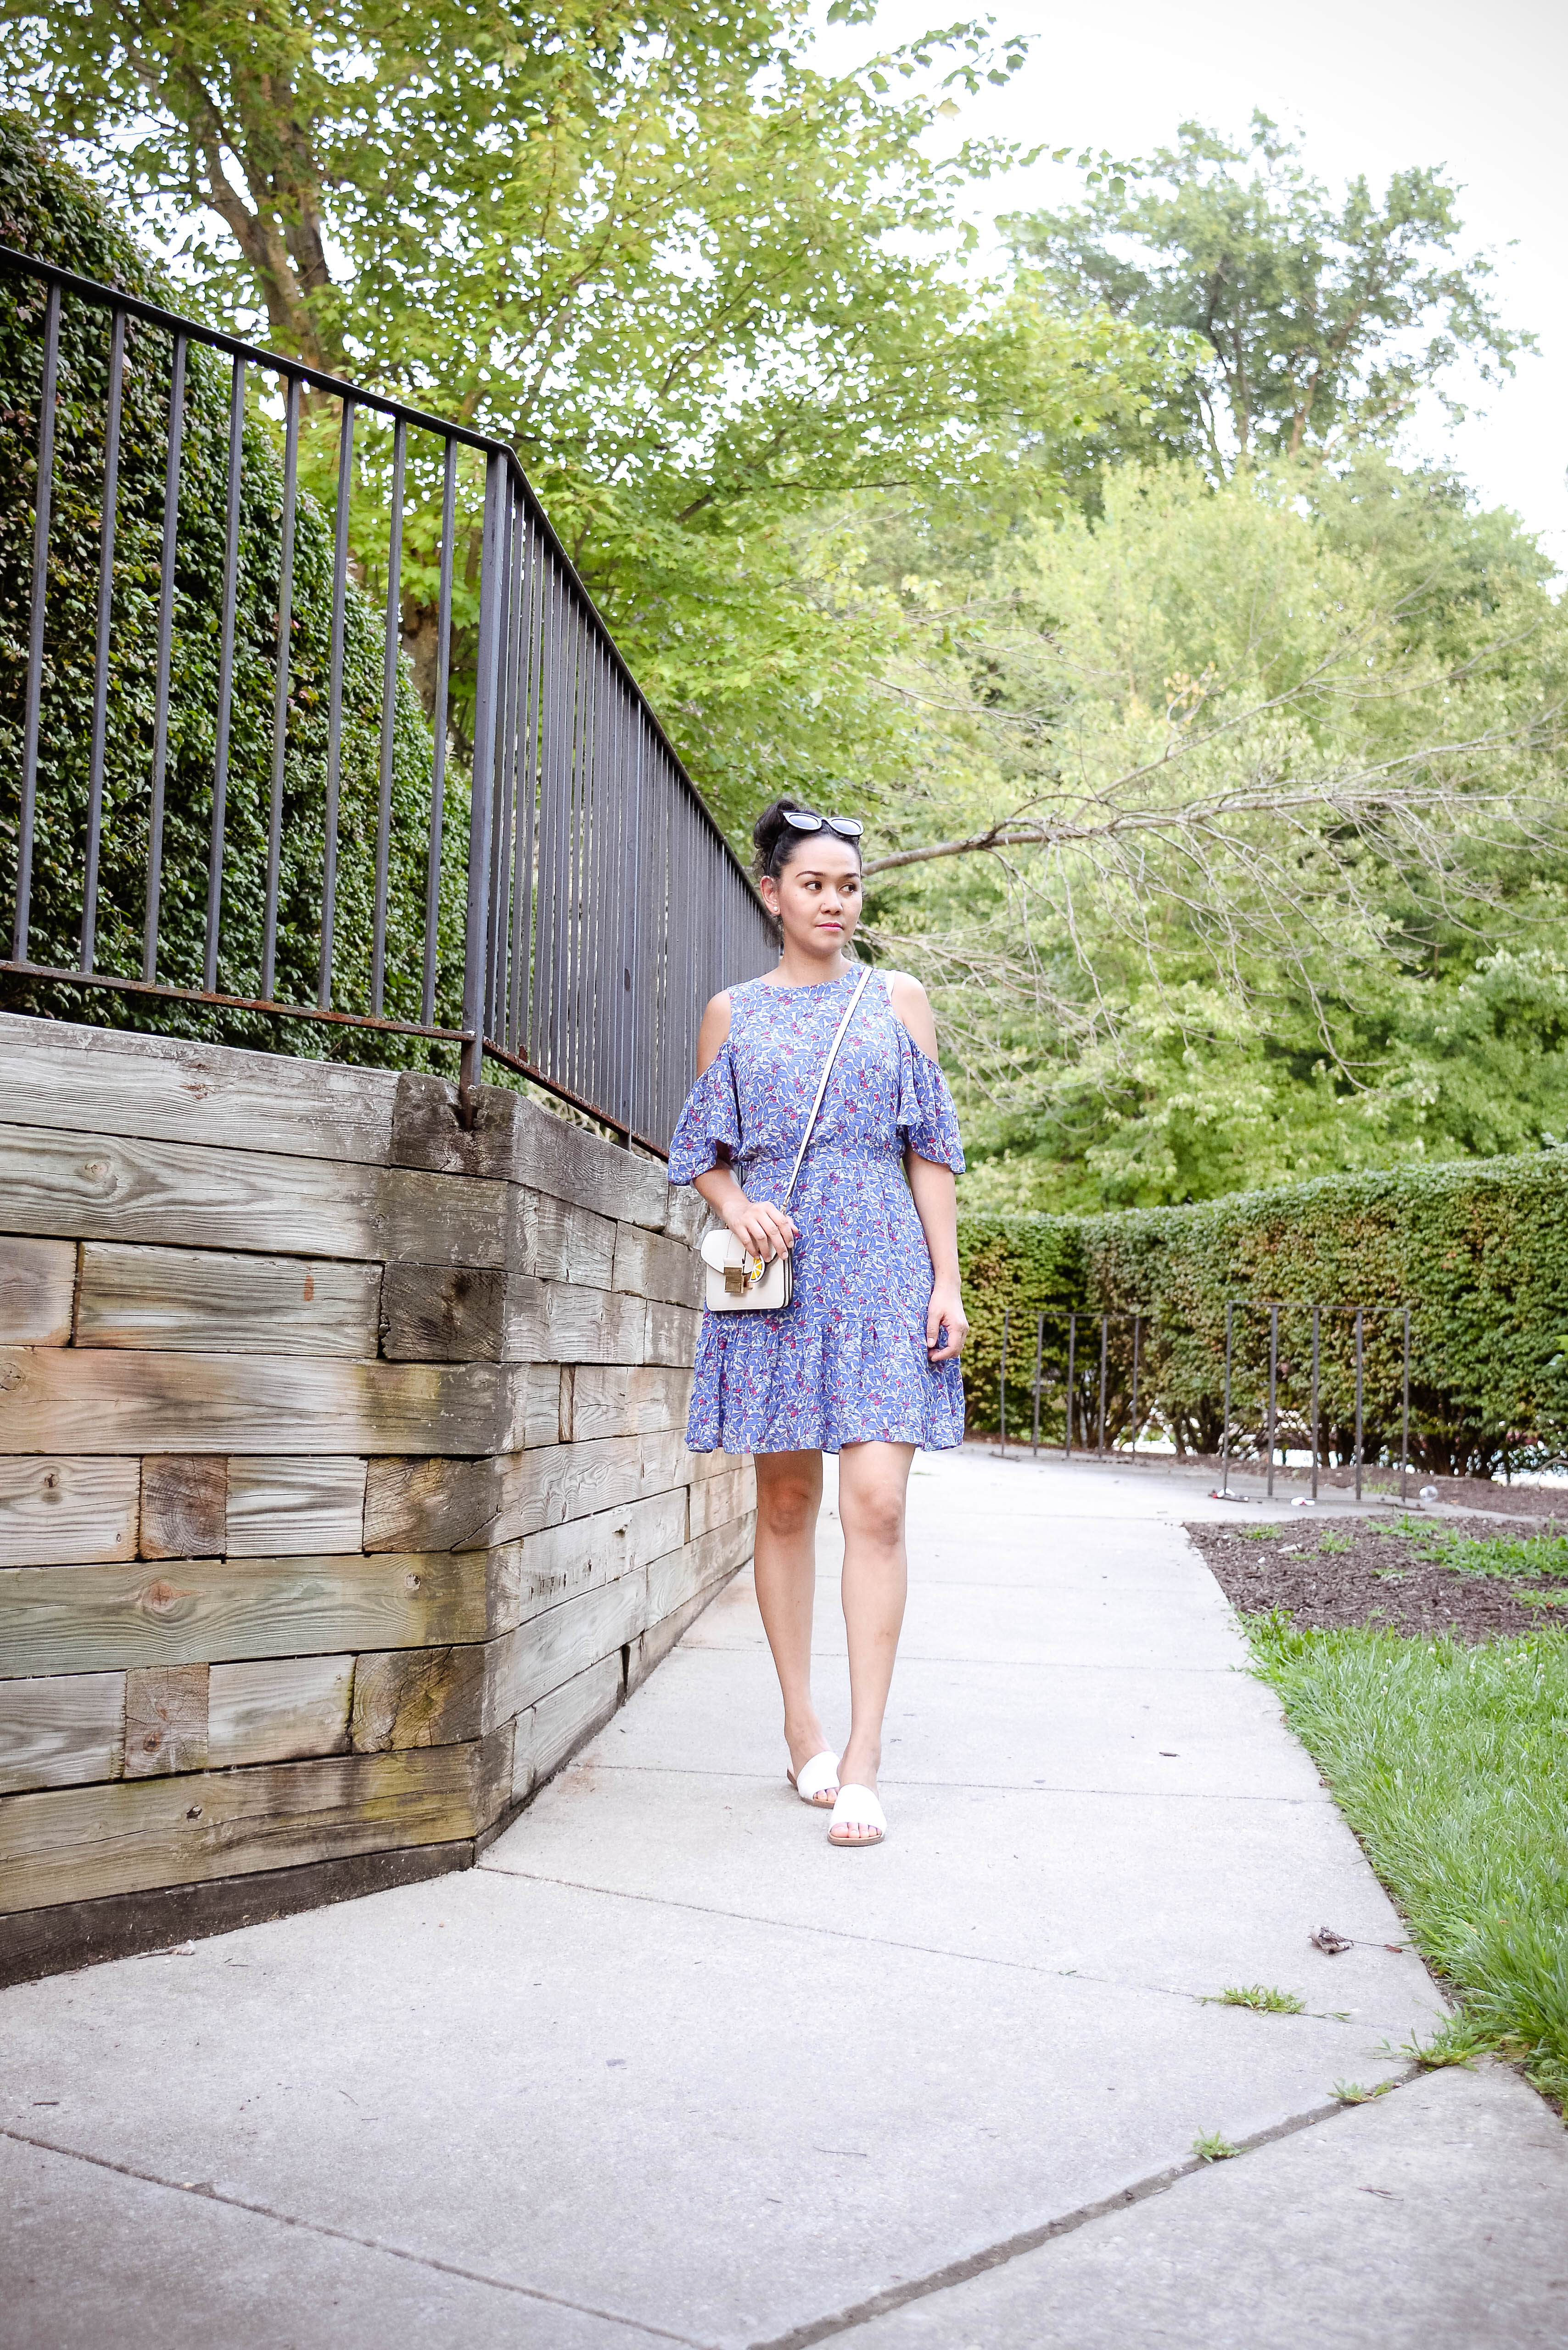 How To Style A Blue Dress